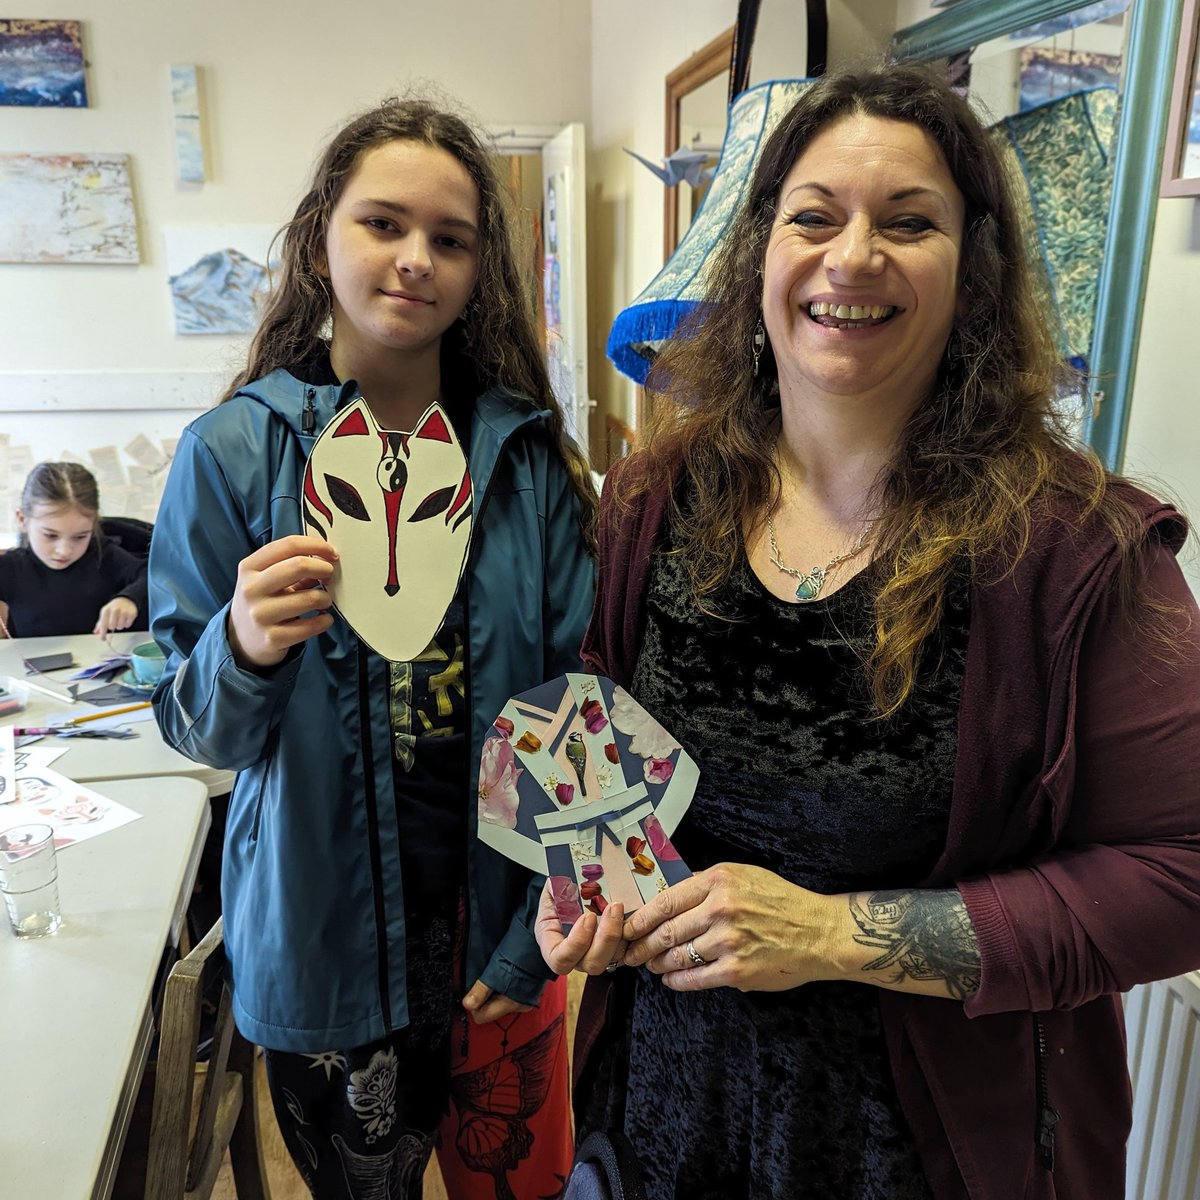 Had a great time this morning at Indigo craft class for all ages! 🇯🇵 #funlearning #unplugged